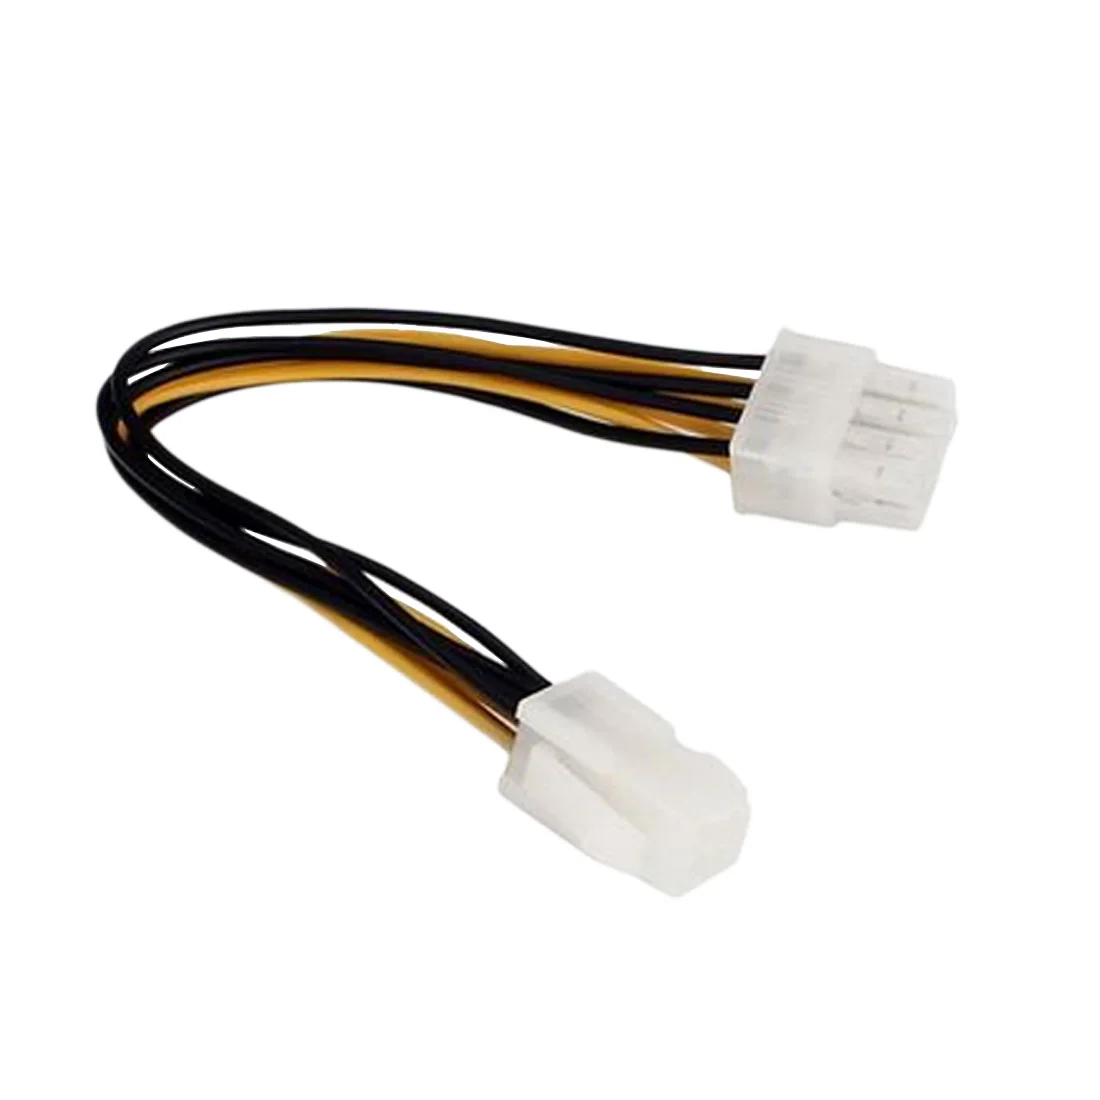 

Cable Cord Connector Adapter 8" inch 4 Pin Male to 8 Pin CPU Power Supply Adapter Converter ATX Cable